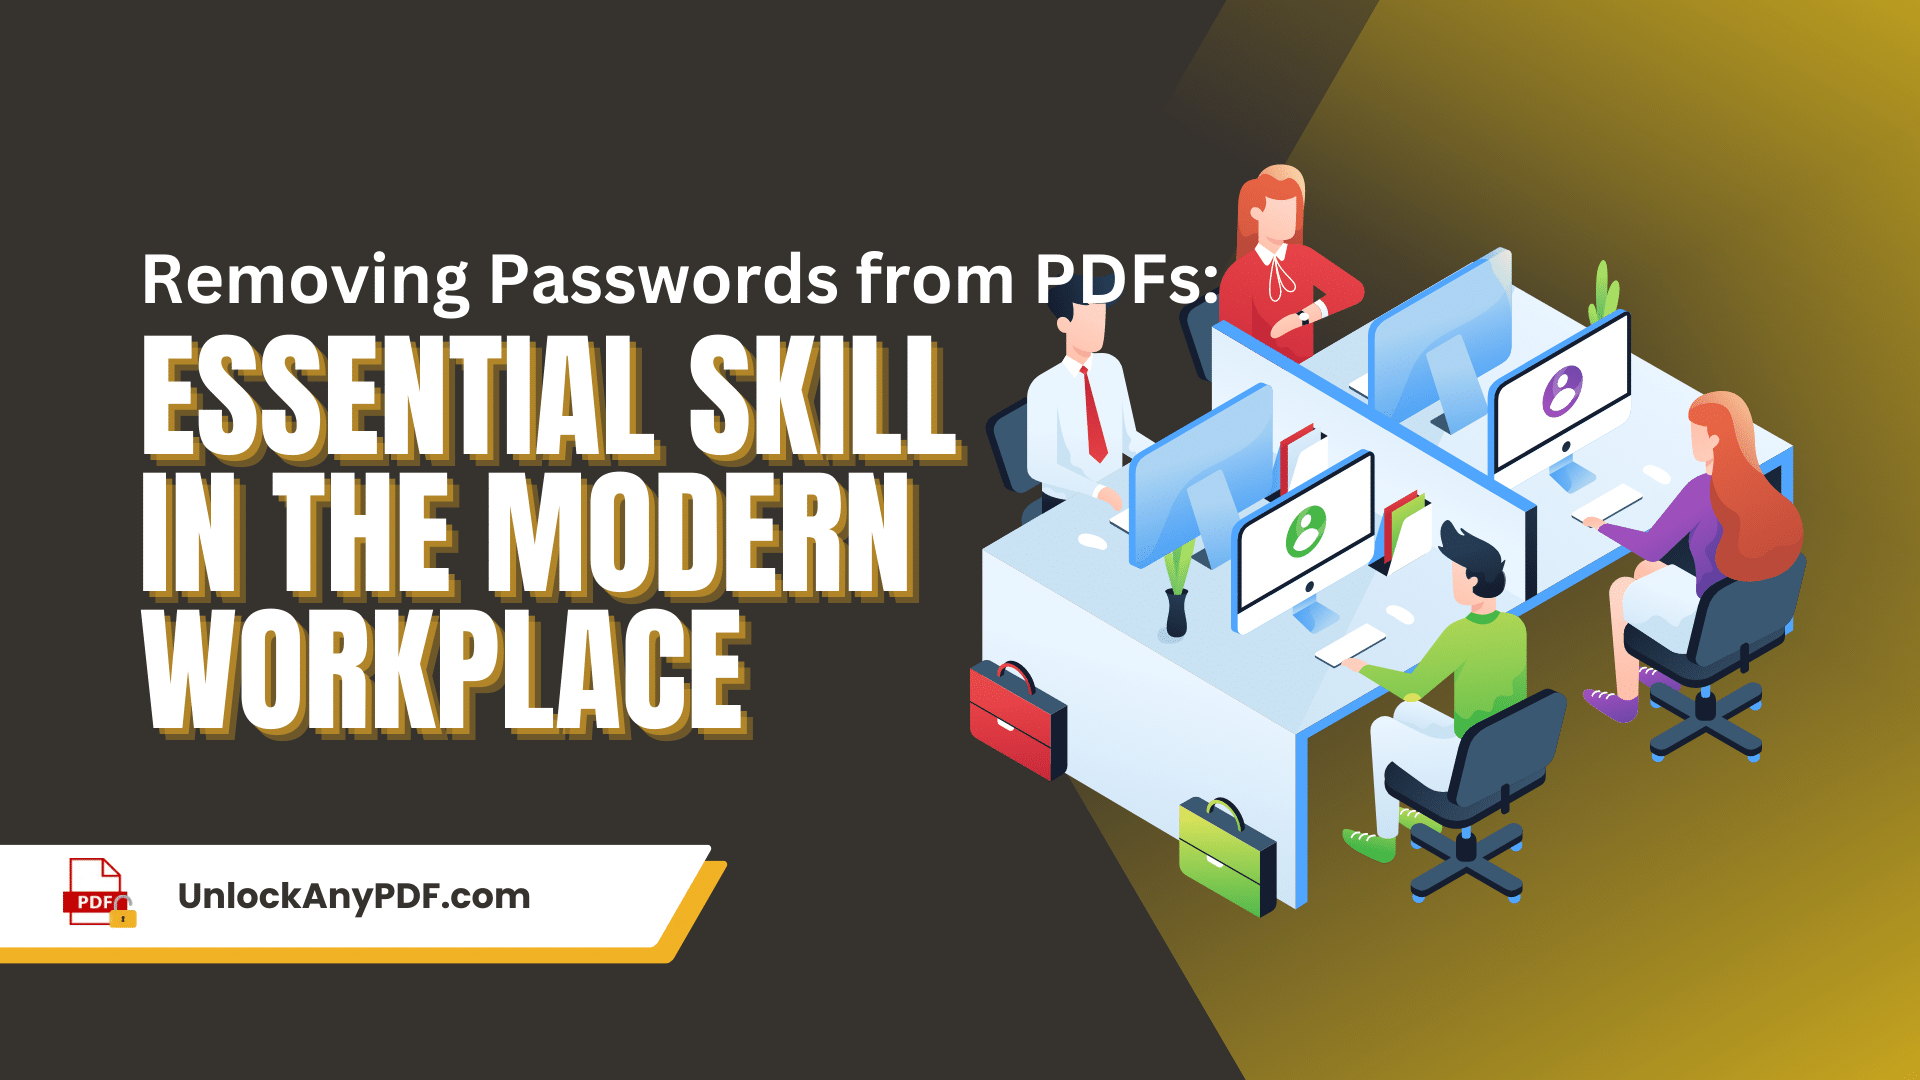 Removing Passwords from PDFs Essential Skill in the Modern Workplace